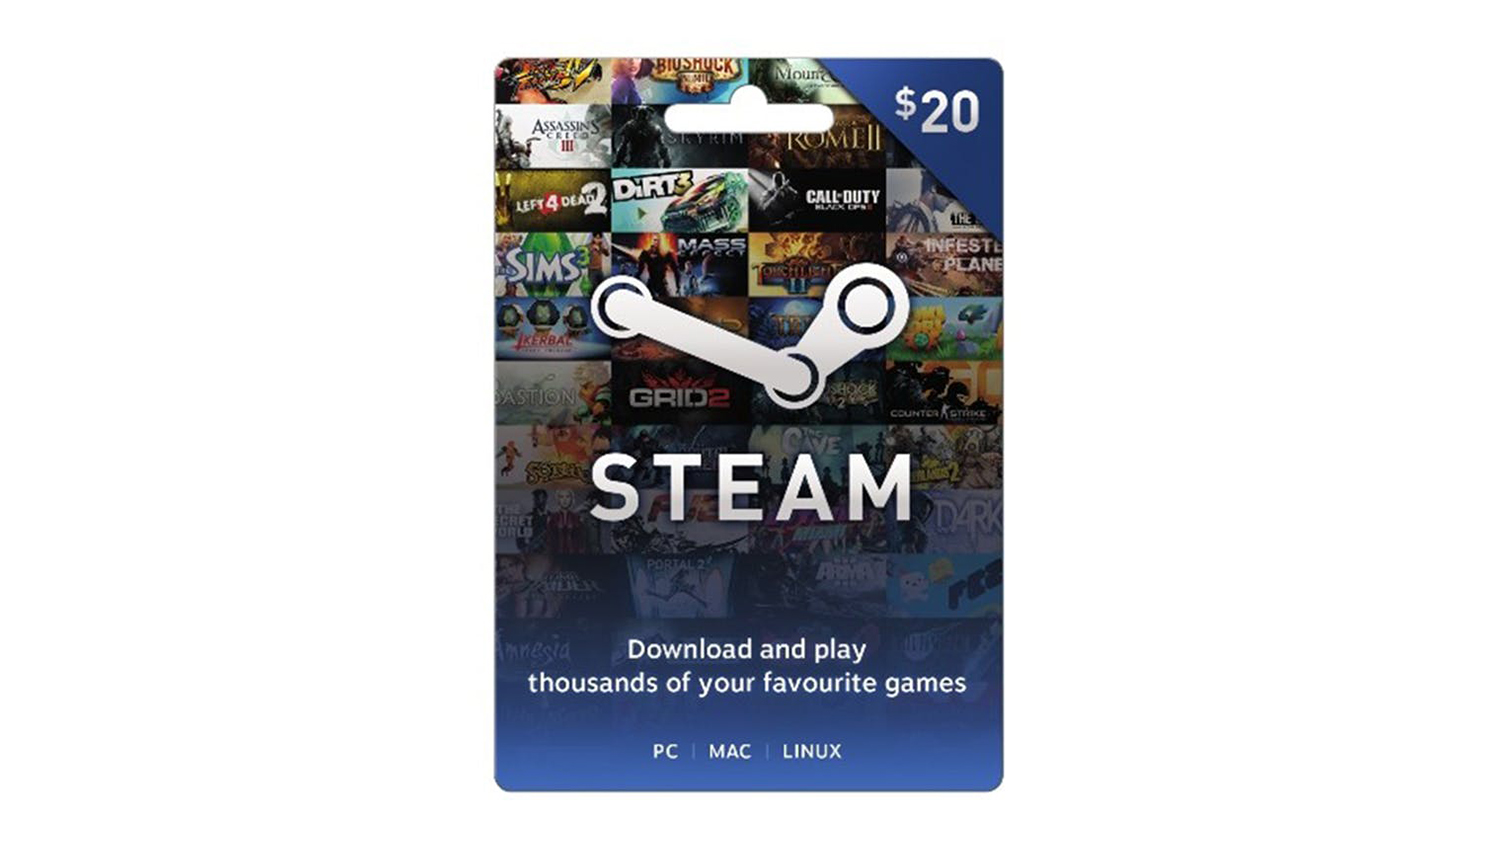 can i buy steam gift card with steam wallet